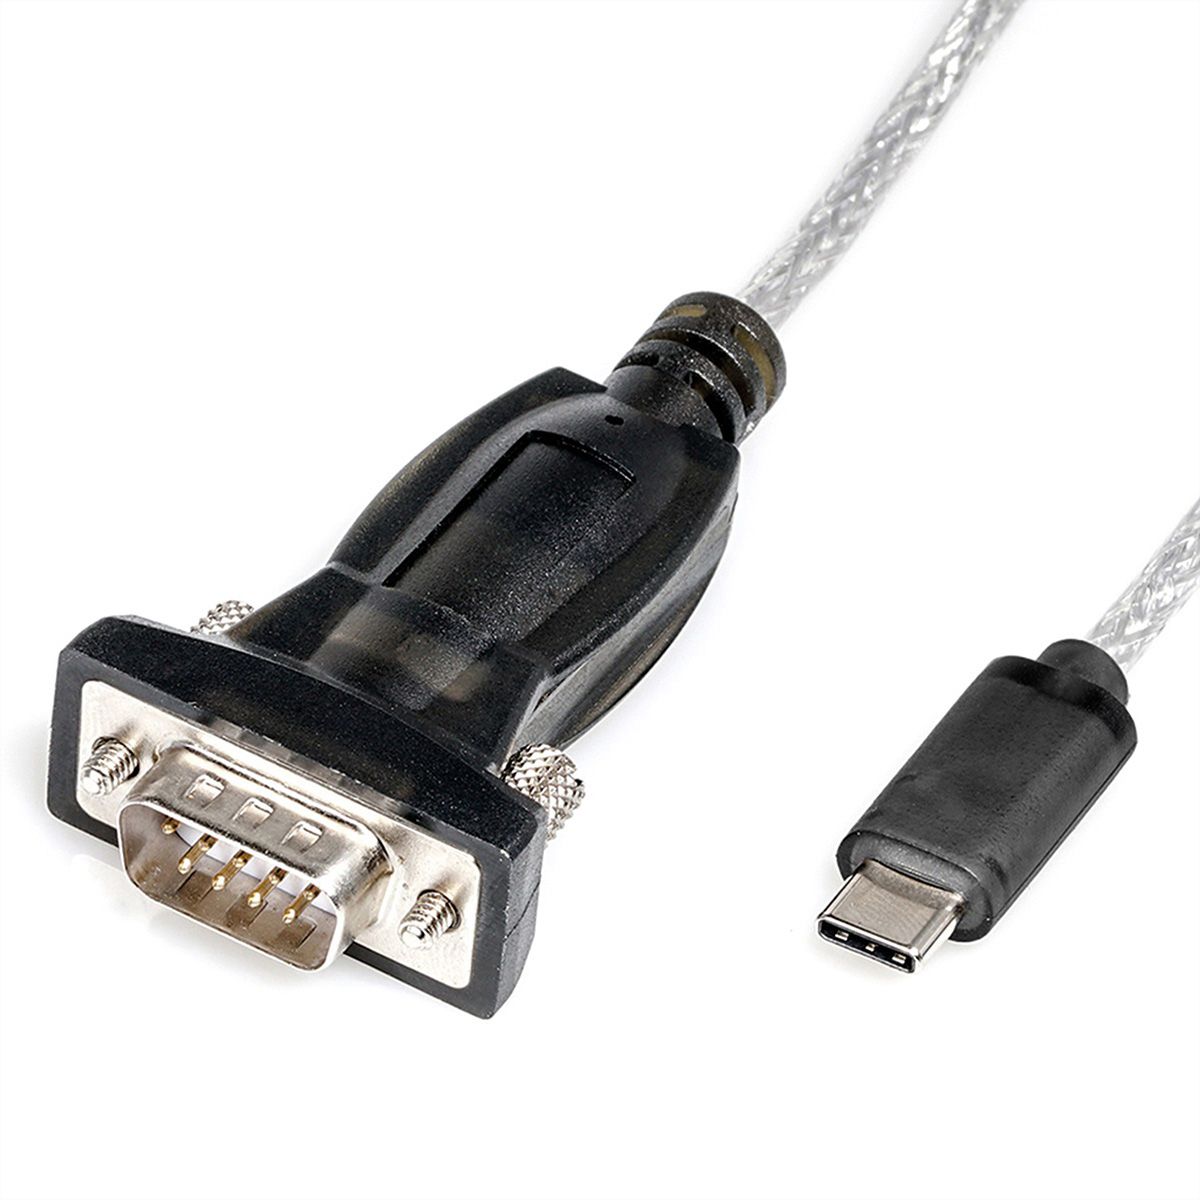 Roline Usb Rs232 Driver For Mac